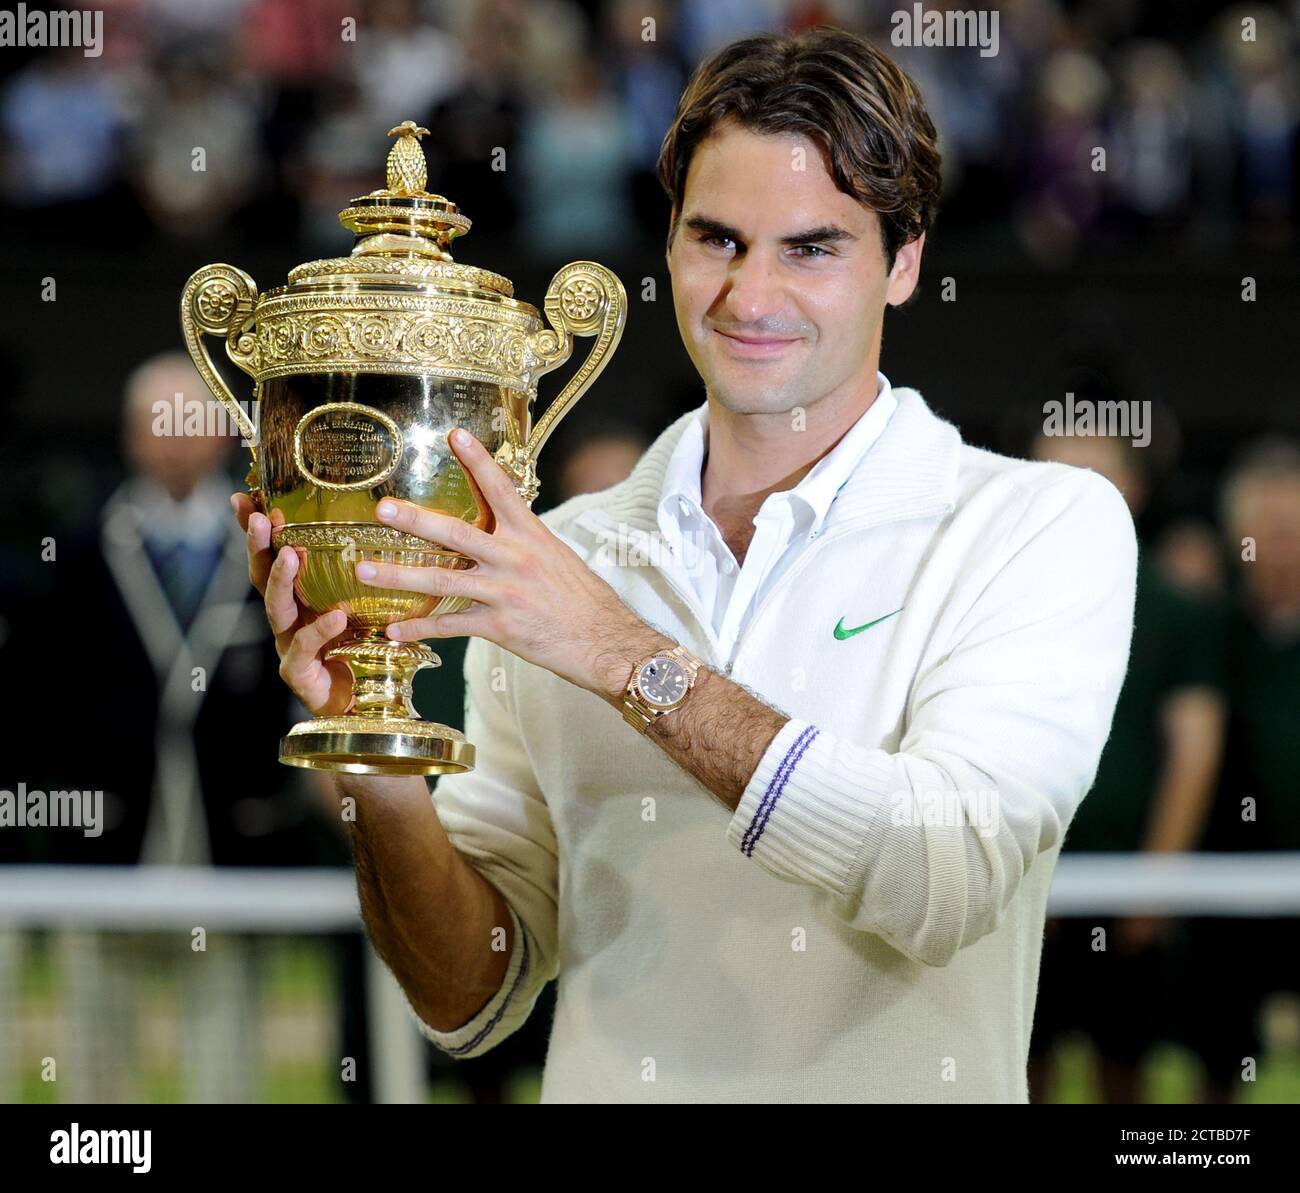 ROGER FEDERER WINS THE MENS SINGLES TITLE  WIMBLEDON CHAMPIONSHIPS 2012  PICTURE : © MARK PAIN / ALAMY STOCK PHOTO Stock Photo